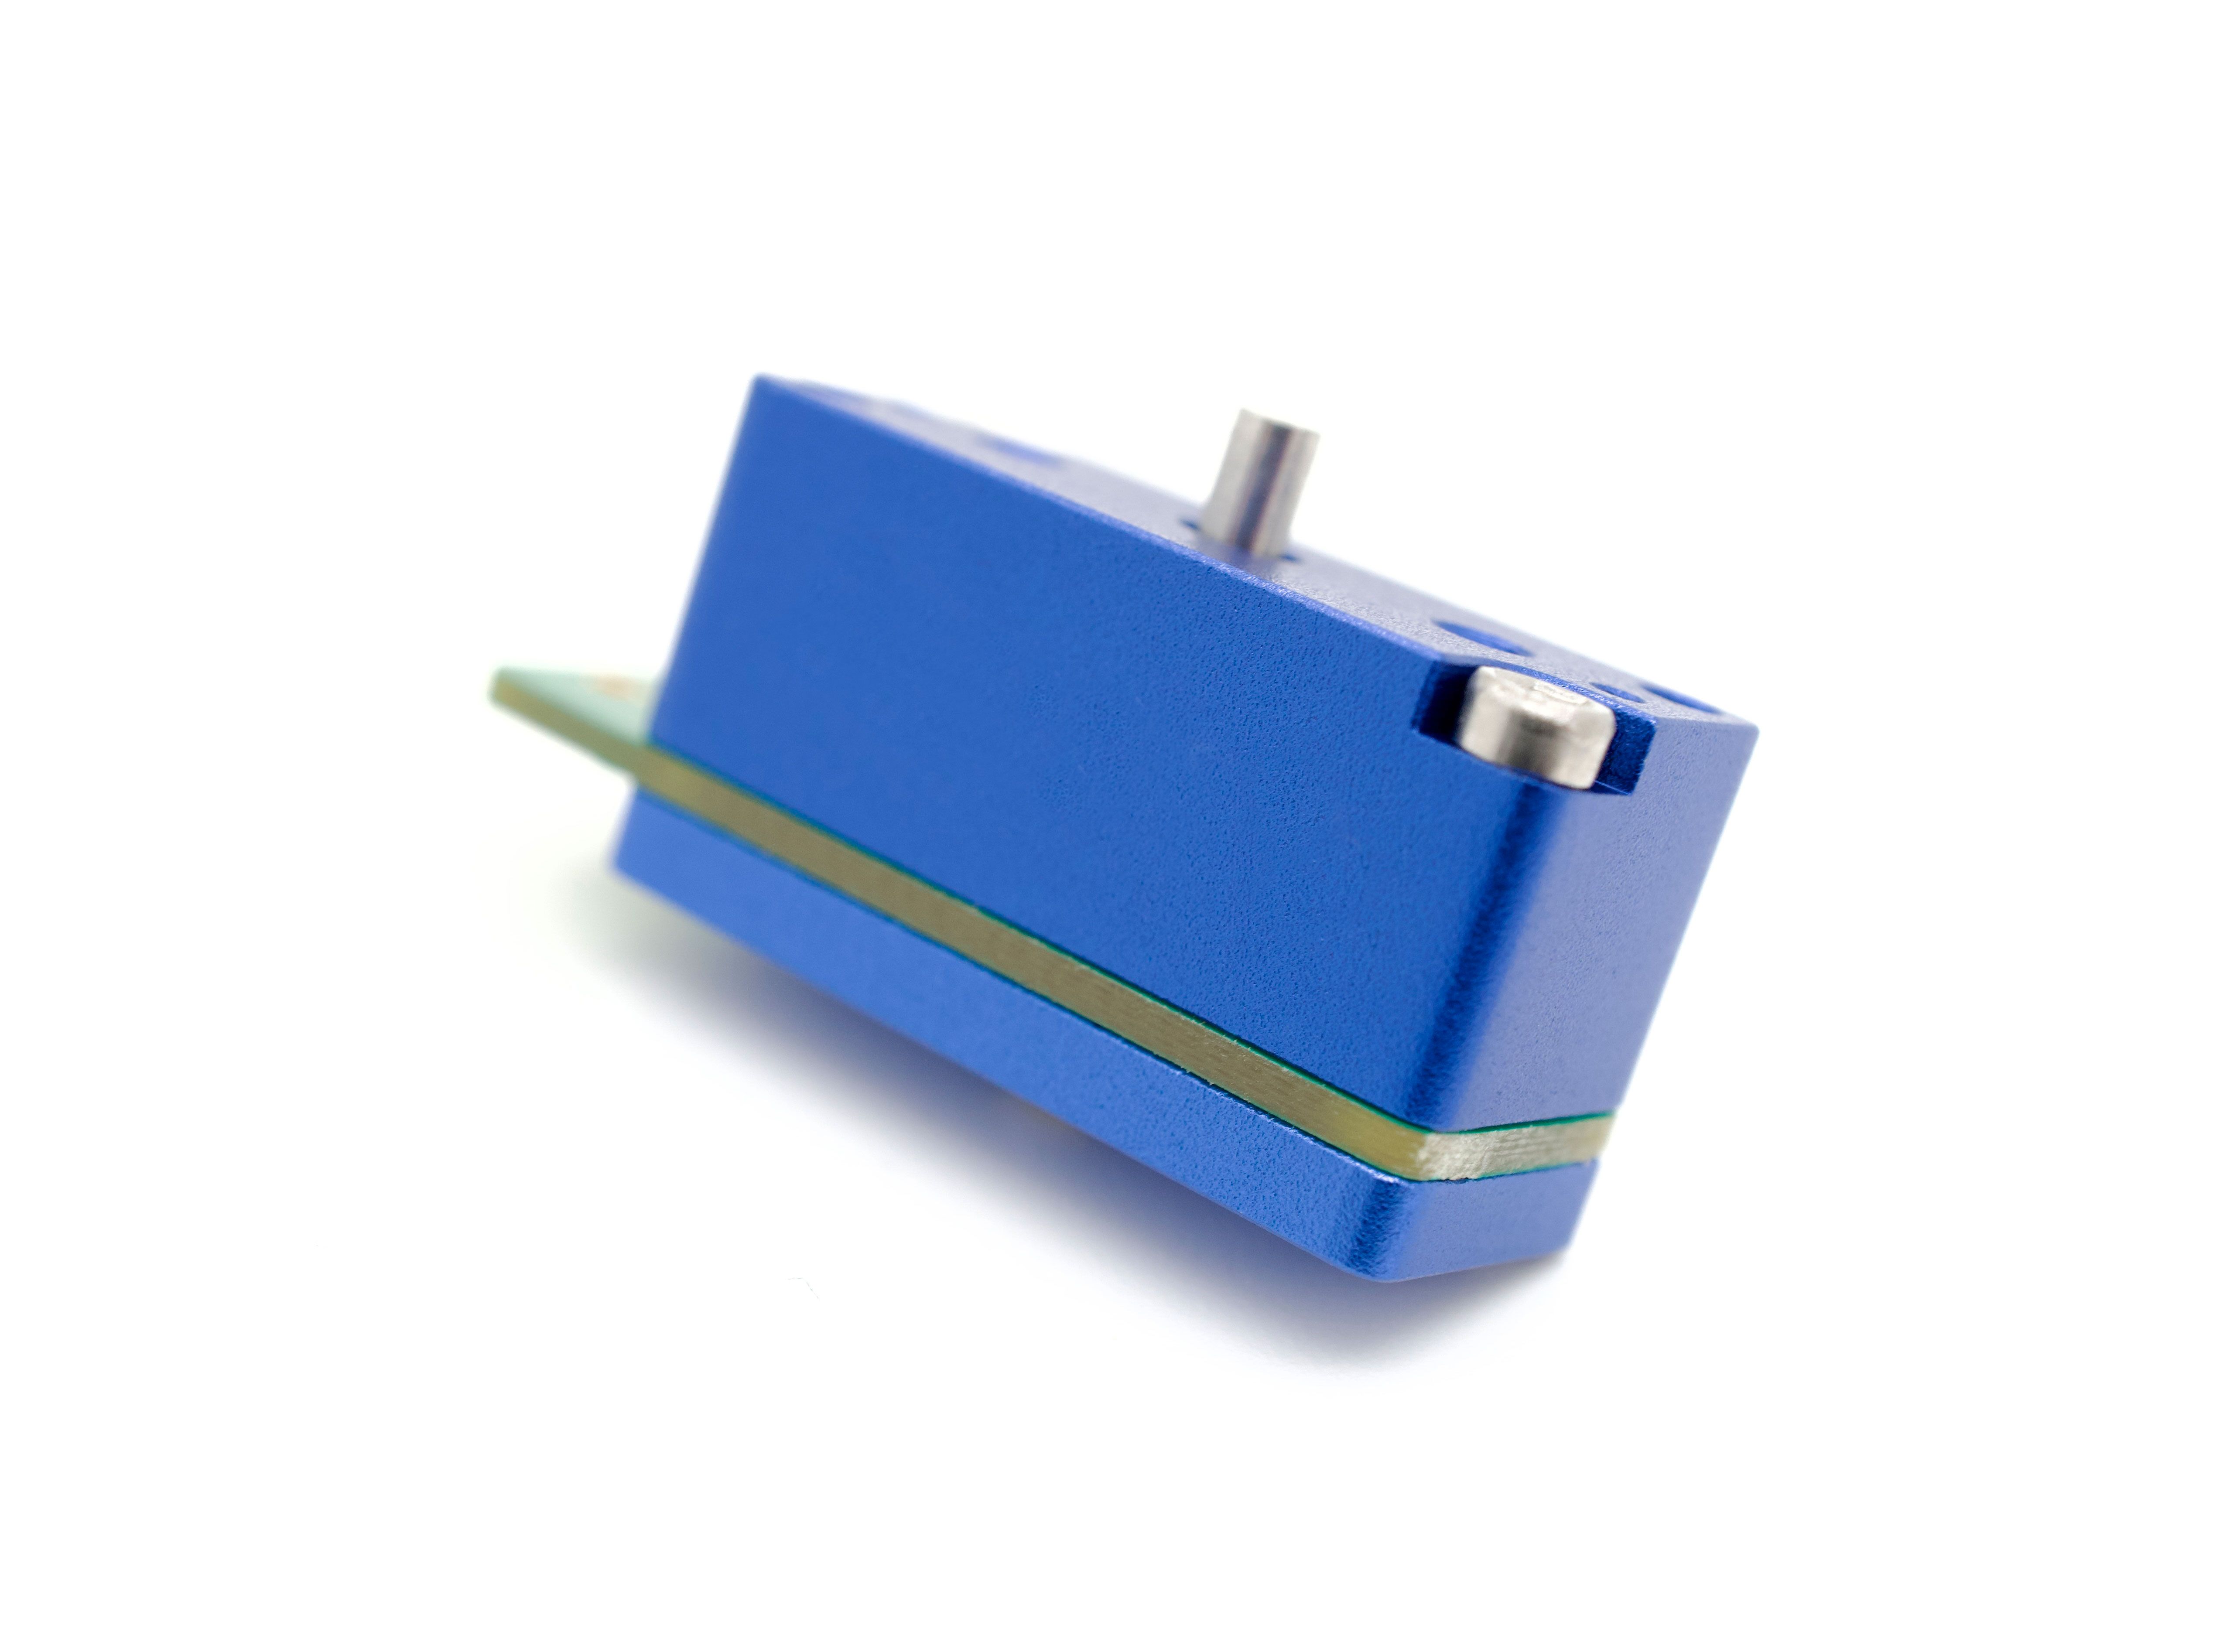 Miniature linear actuator with 2 mm stroke and 1 N - shape memory alloy